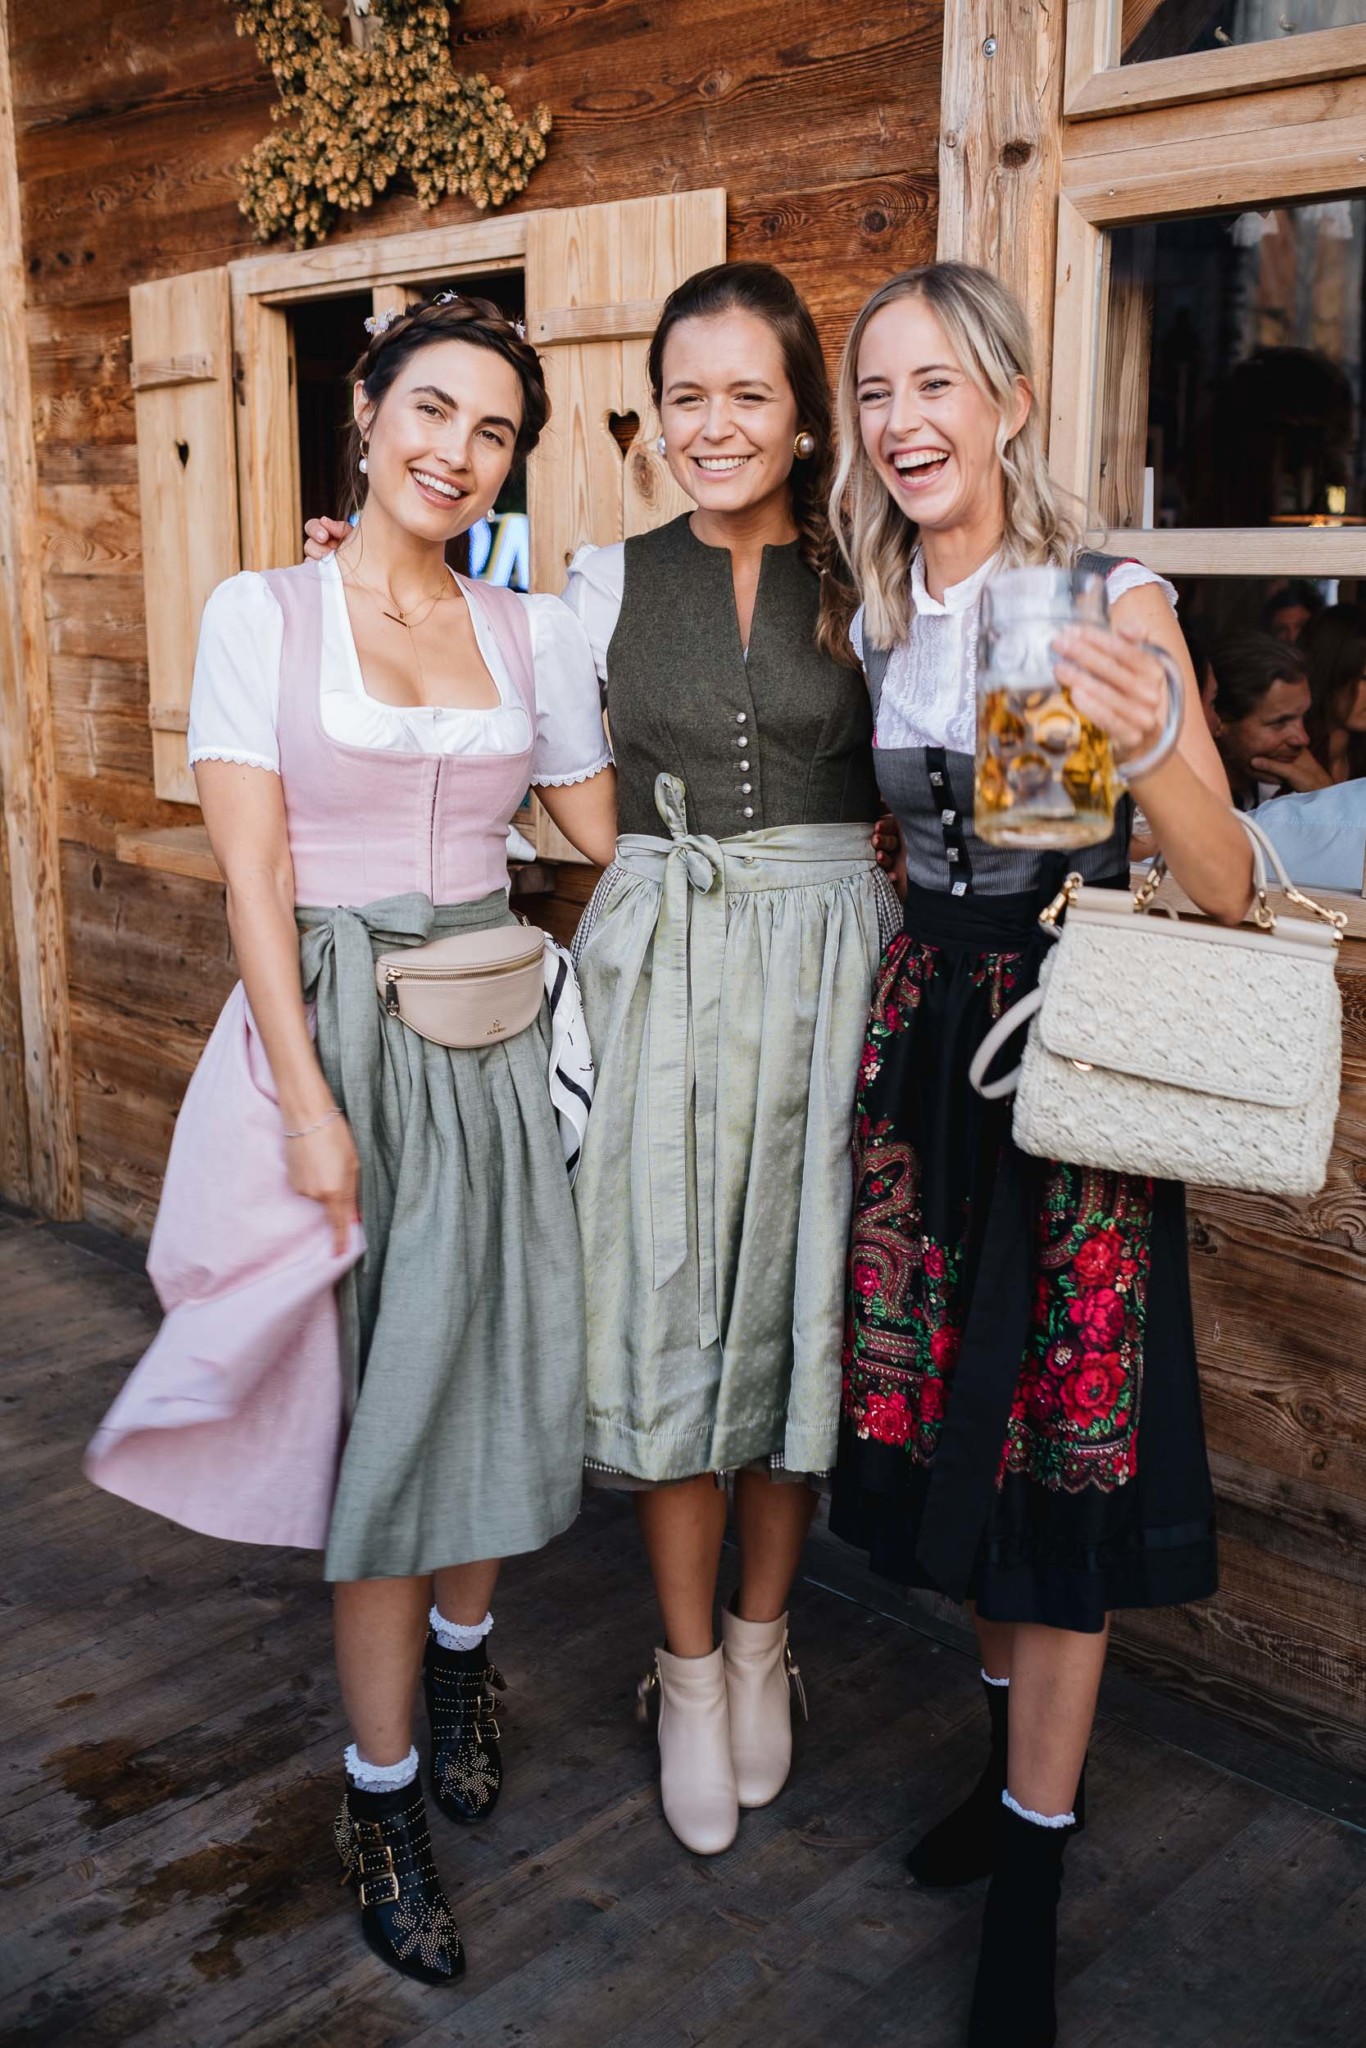 Are You Ready For The Wiesn? 10 Oktoberfest Facts | You Rock My Life